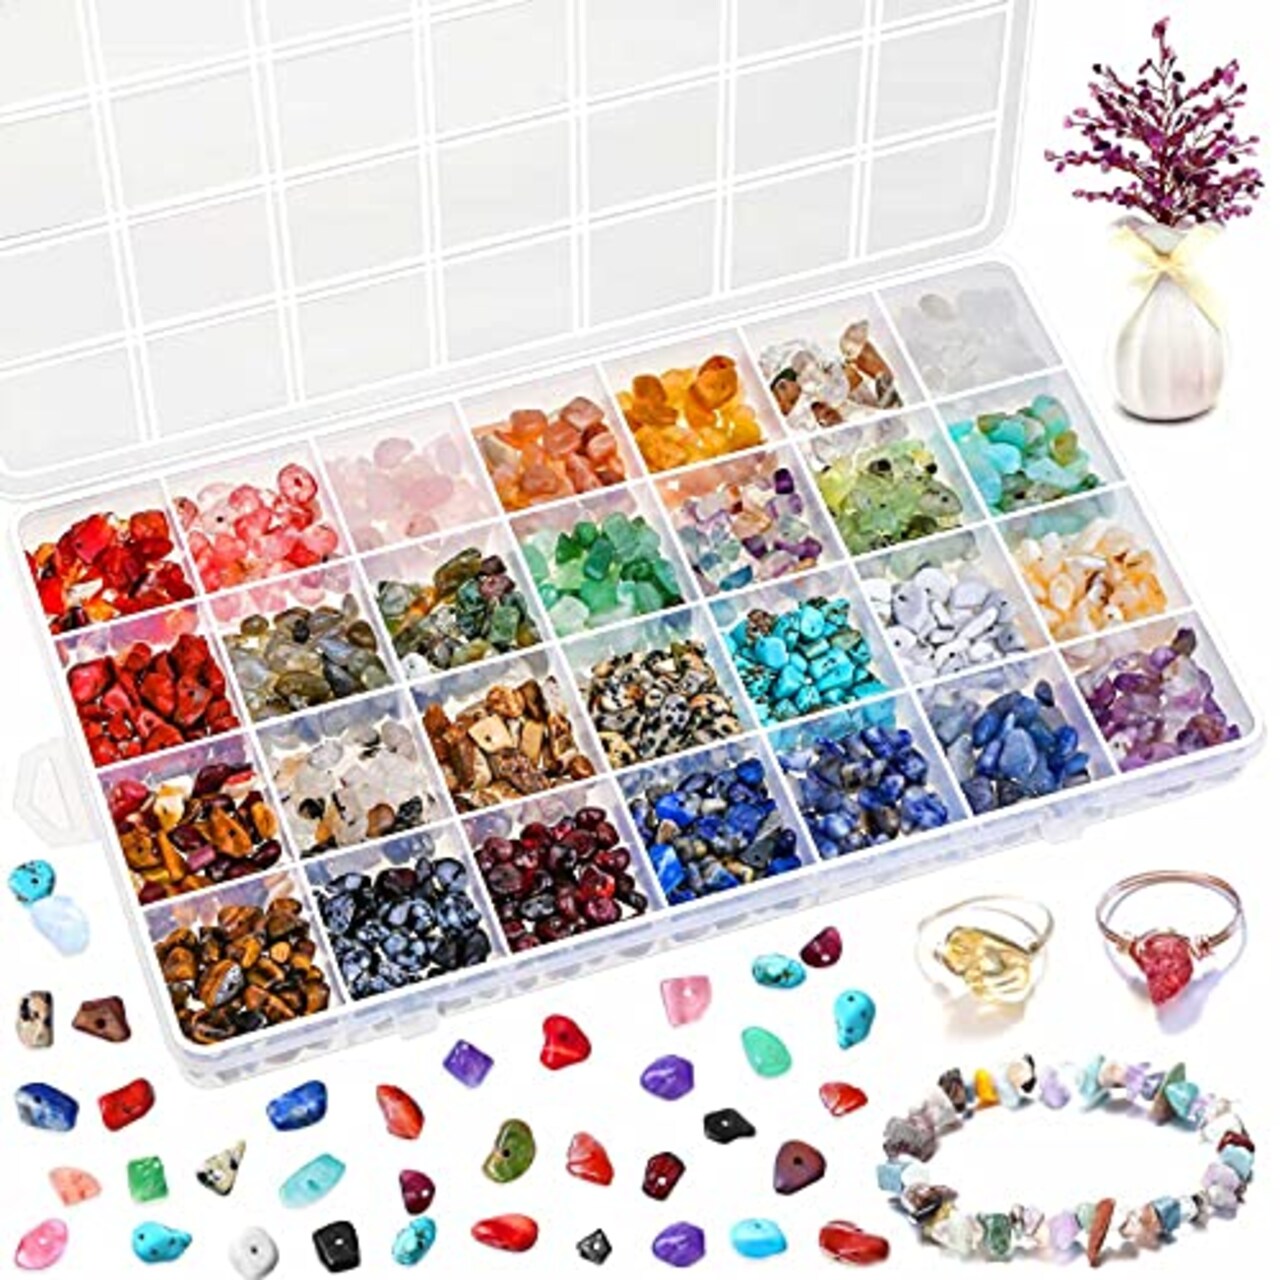 selizo Crystal Beads for Ring Making, 28 Colors Chips and Gemstone Beads,  Ring Making Kit with Plastic Box for Jewelry, Bracelets, Earring Making  Supplies